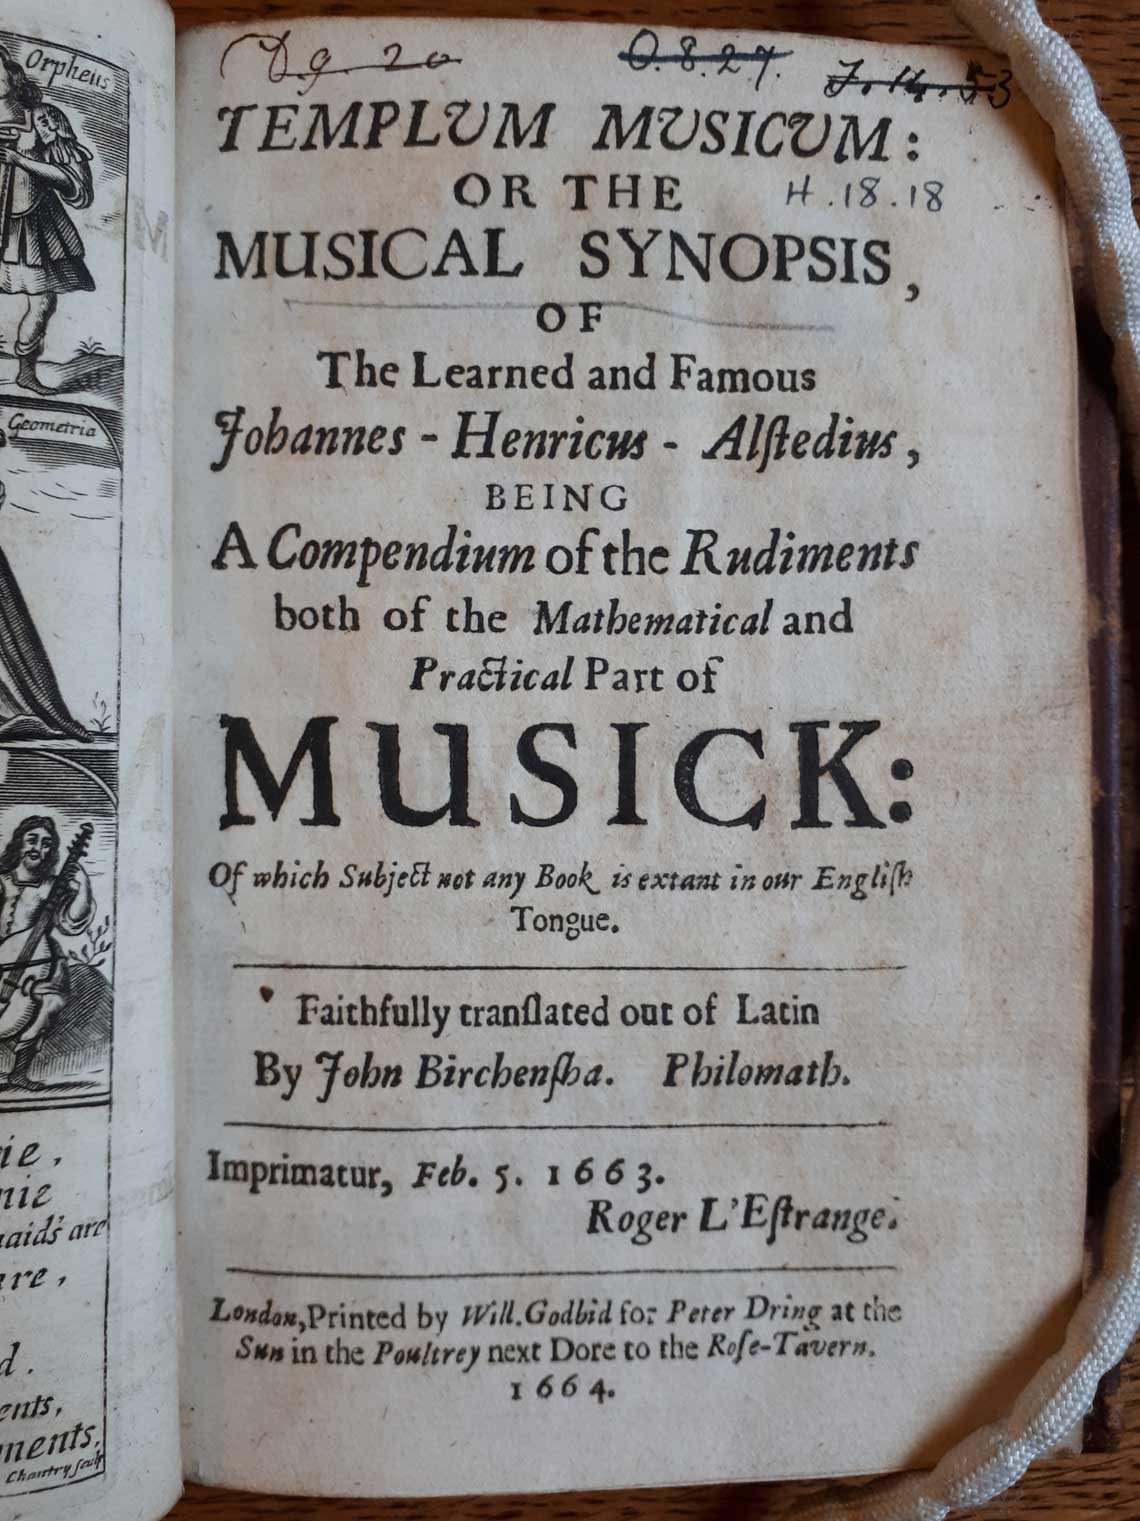 Typeset title page, reading in part, 'Templum music: or the musical synopsis, of the learned and famous Johannes-Henricus-Alstedius, being a compendium of the rudiments both of the mathematical and practical part of musick, of which subject not any book is extant in our English tongue. Faithfully translated out of Latin by John Birchensha. Philomath.'